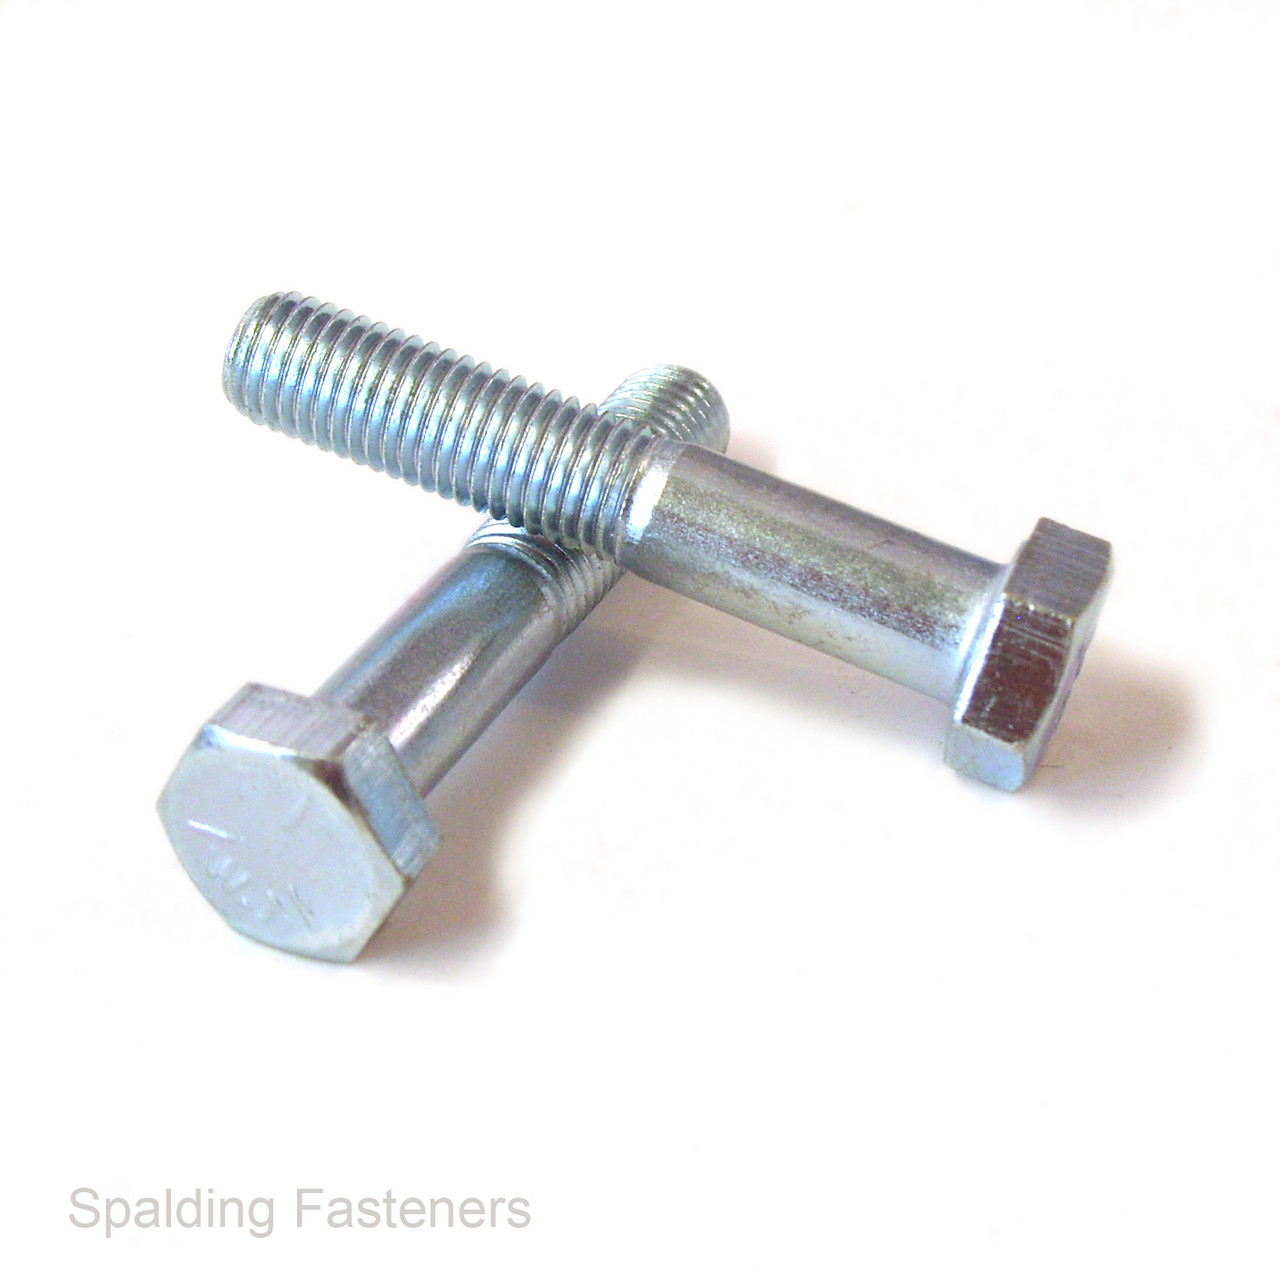 1/2" UNF Zinc Plated Steel Hex Head Bolts With Shank